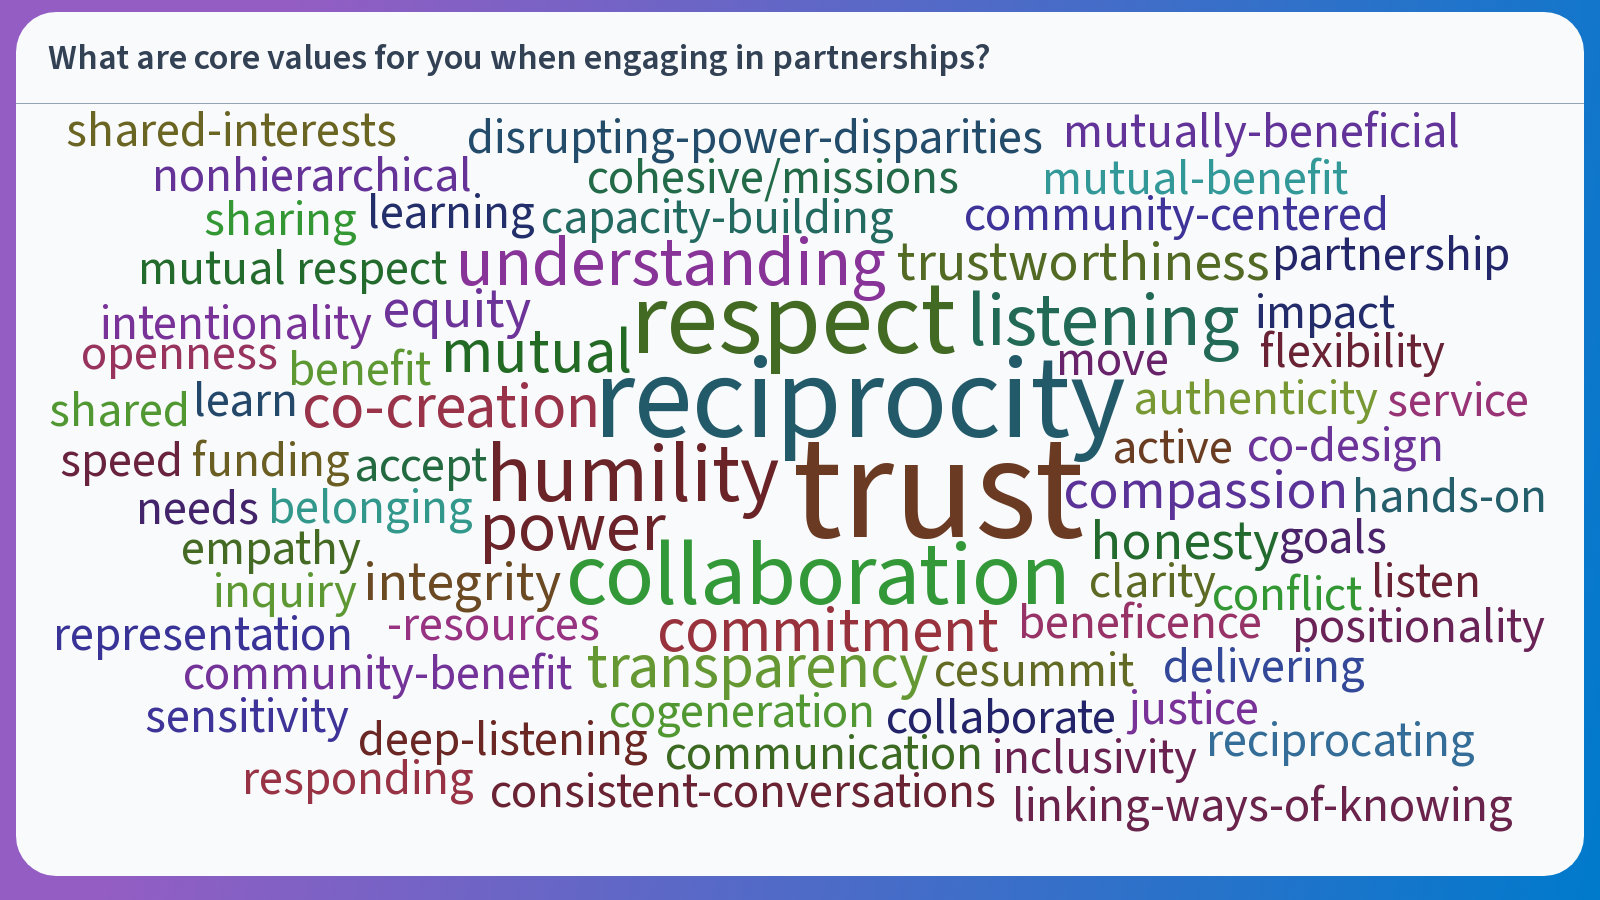 A word cloud with words related to core values of community engagement. The most popular words are in the largest font. They are trust, respect, reciprocity and collaboration.